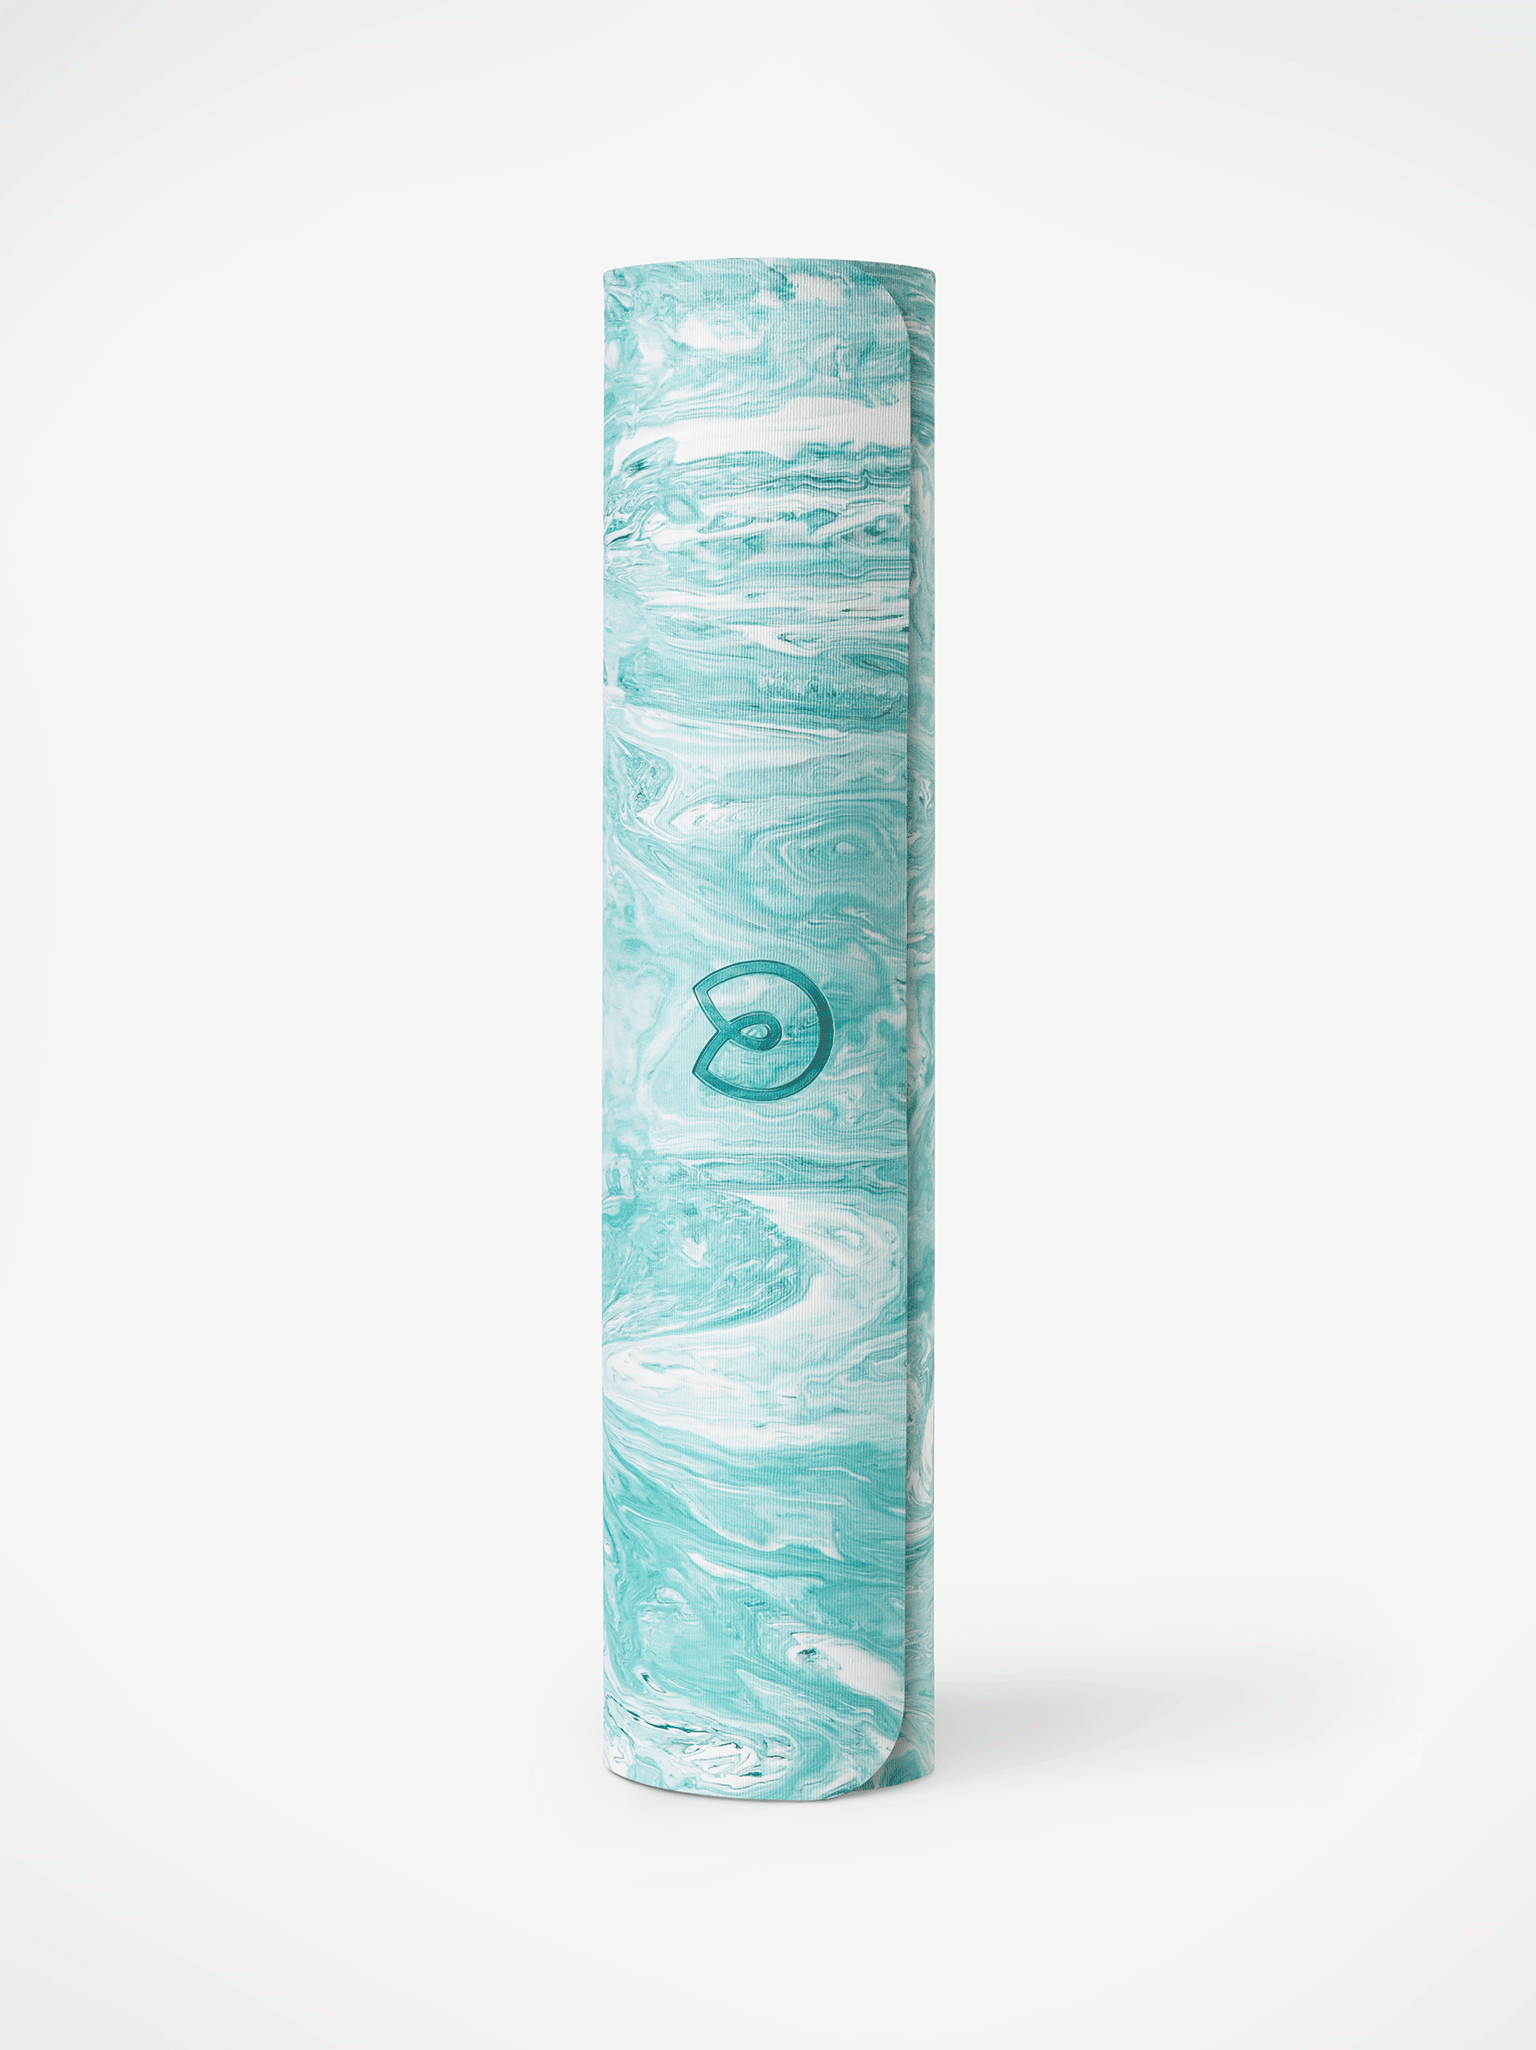 Aqua blue marble-patterned yoga mat rolled up standing against a white background, viewed from the side with visible brand logo.